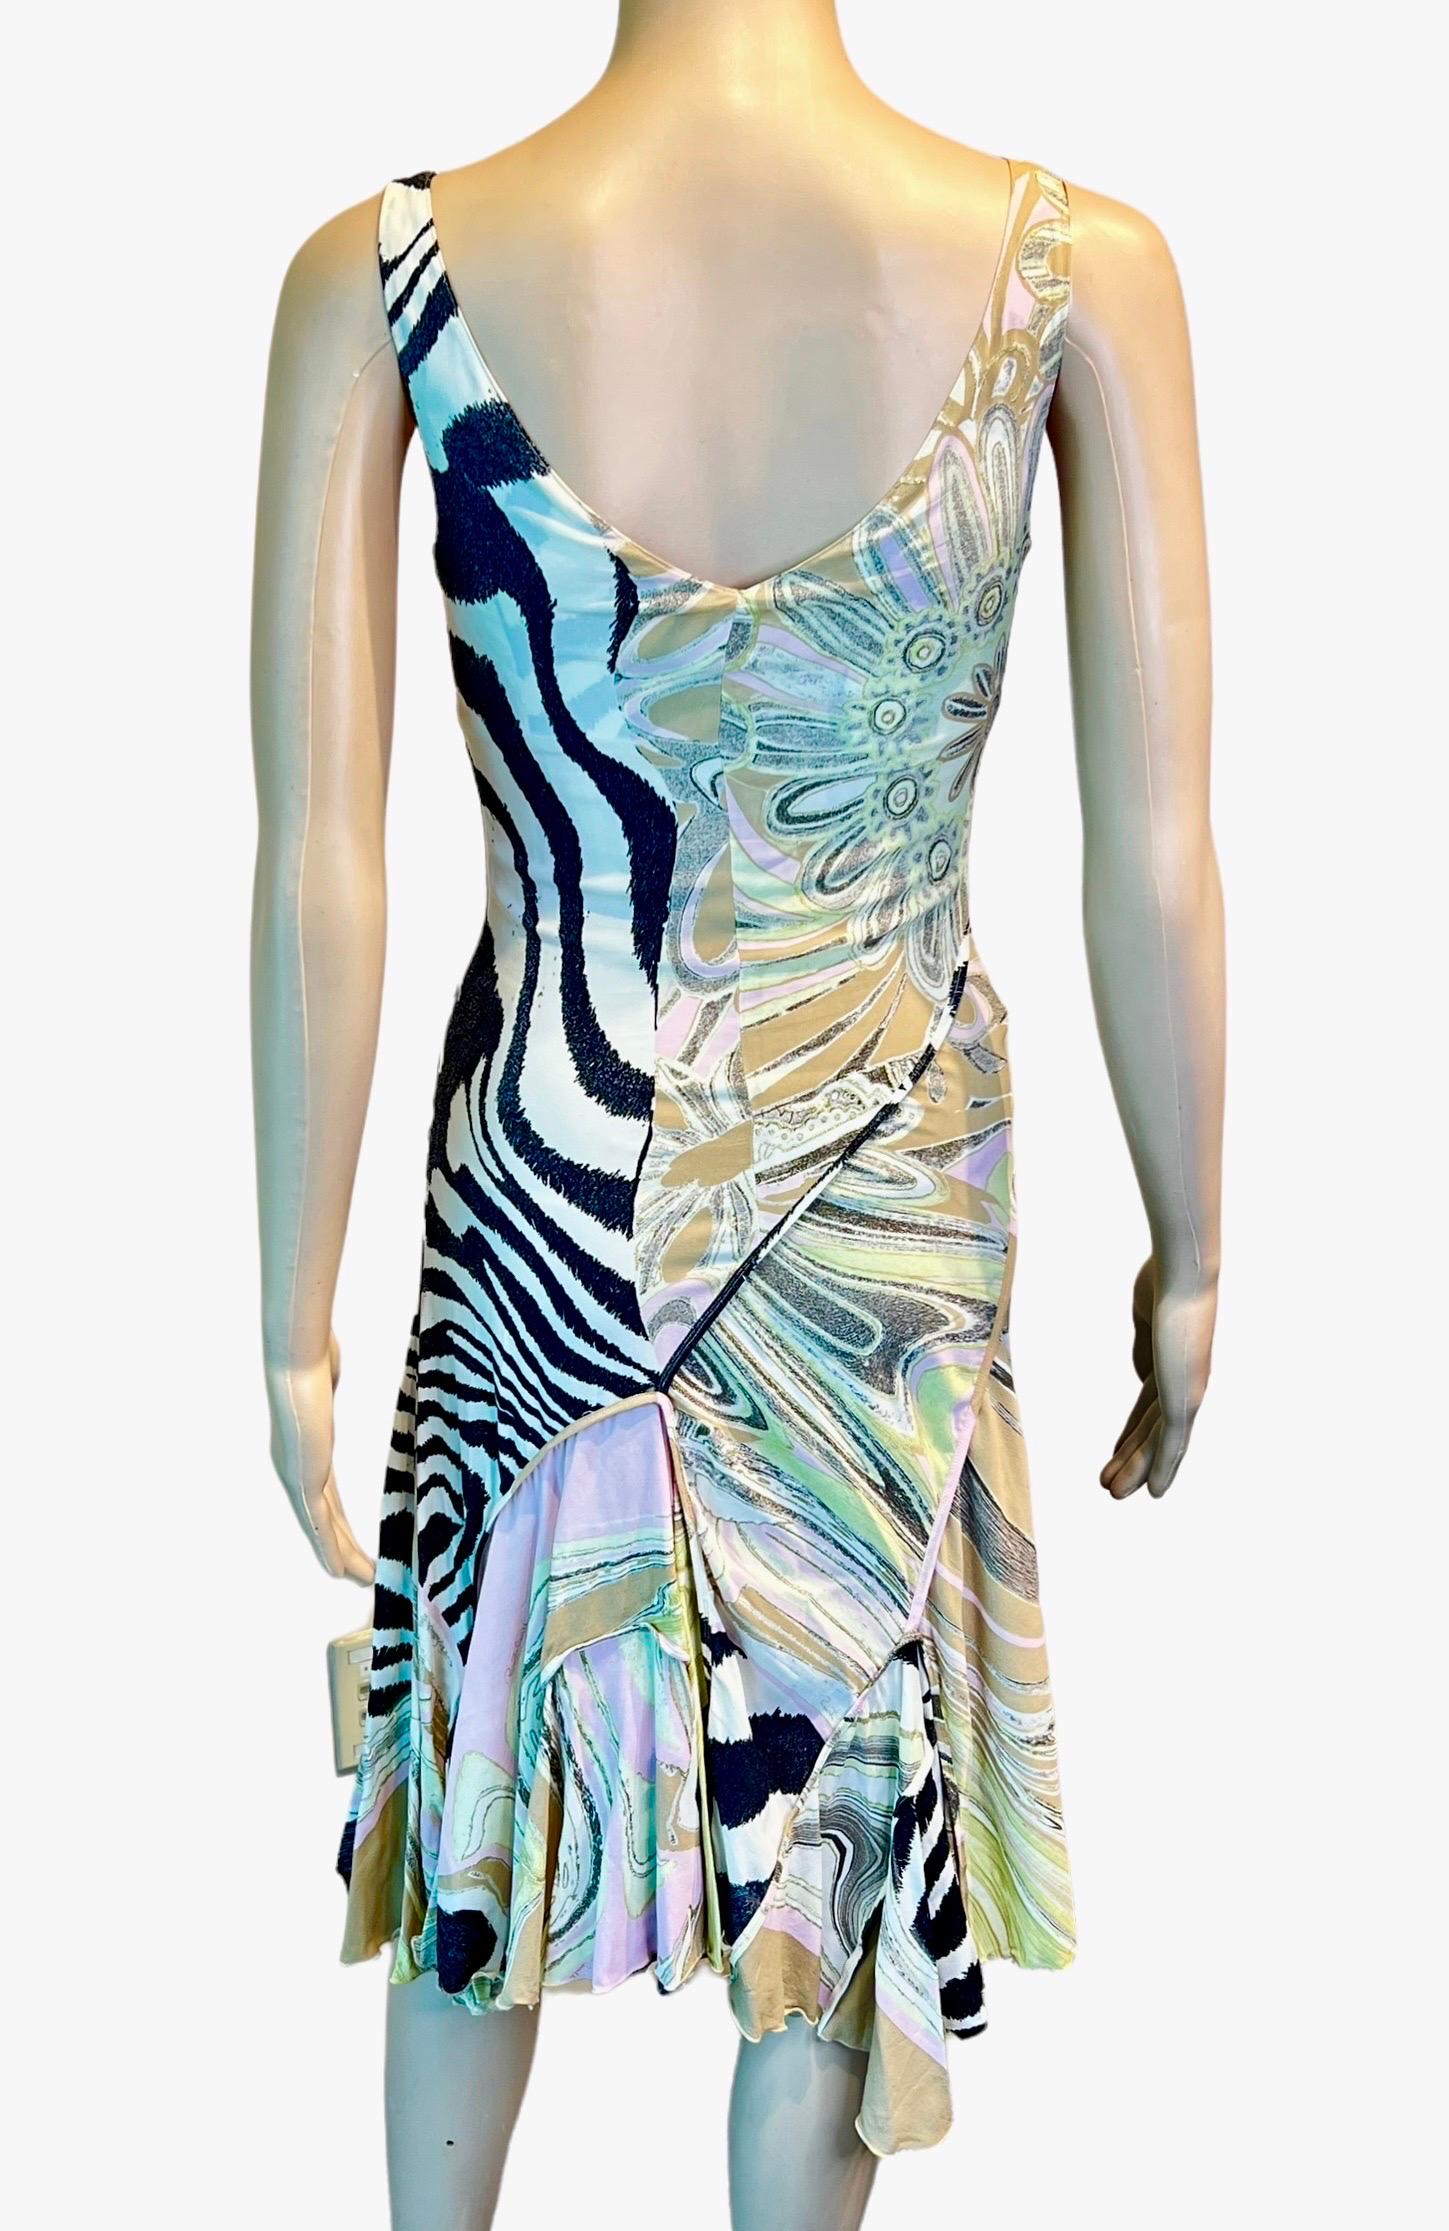 Roberto Cavalli S/S 2004 Floral Abstract Print Asymmetric Dress For Sale 1